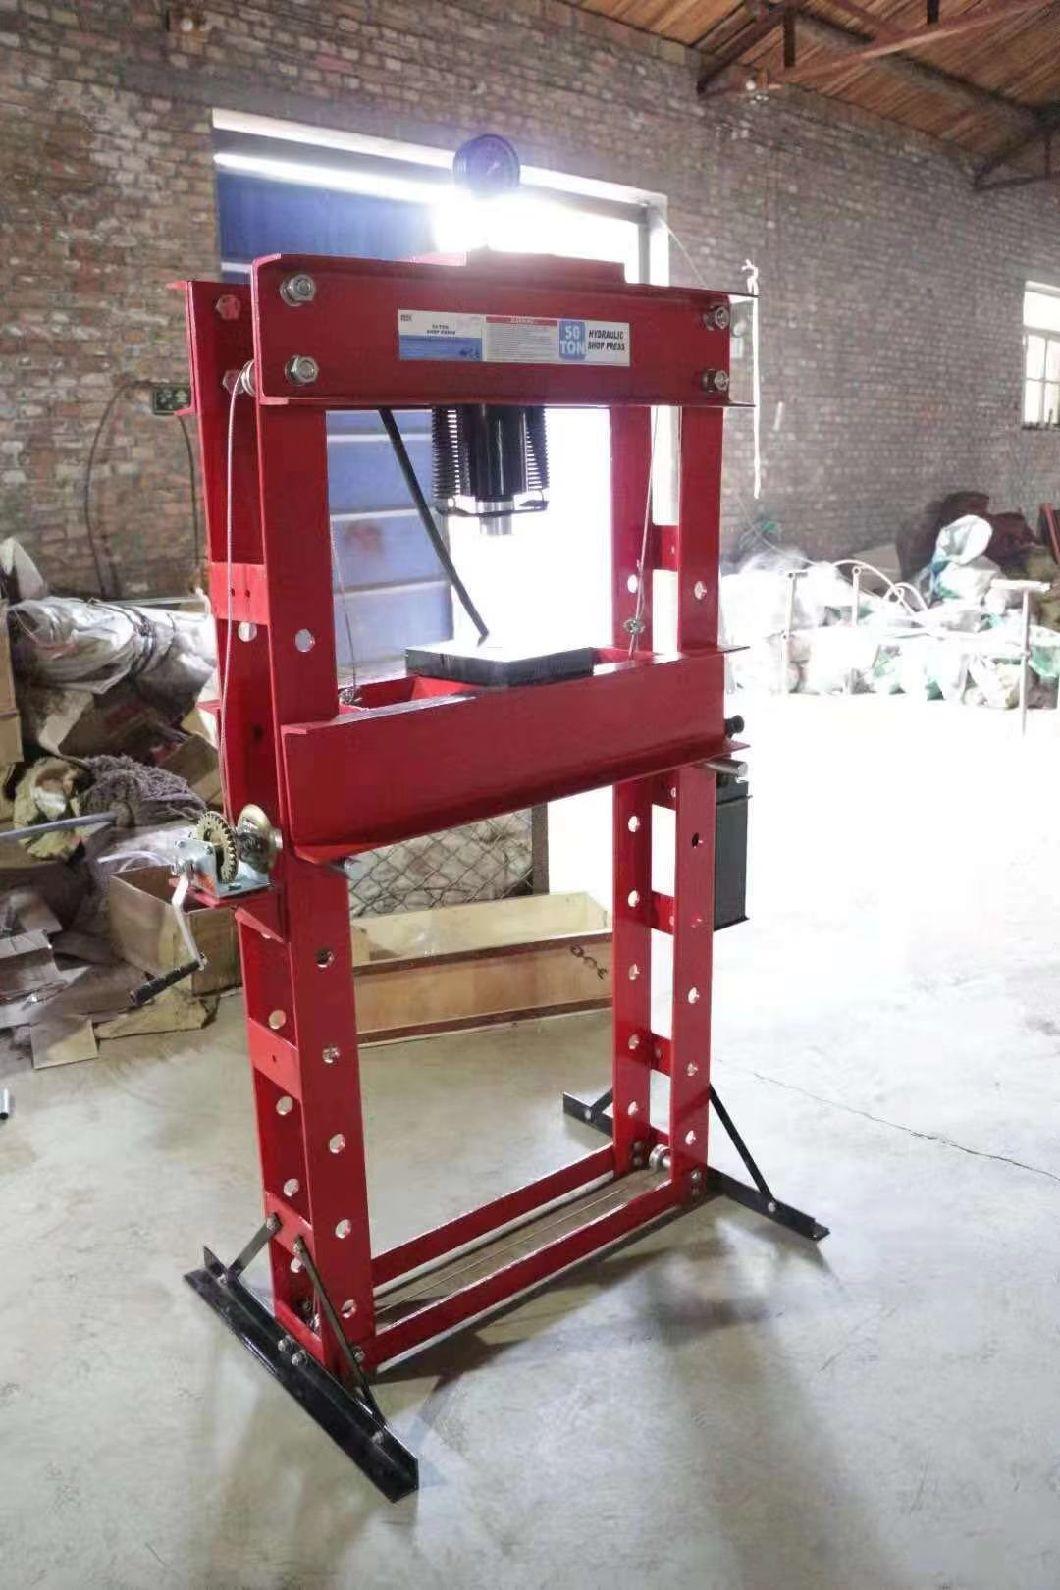 Garage Repaired Tools 45t Hydraulic Shop Press with Safety Guard